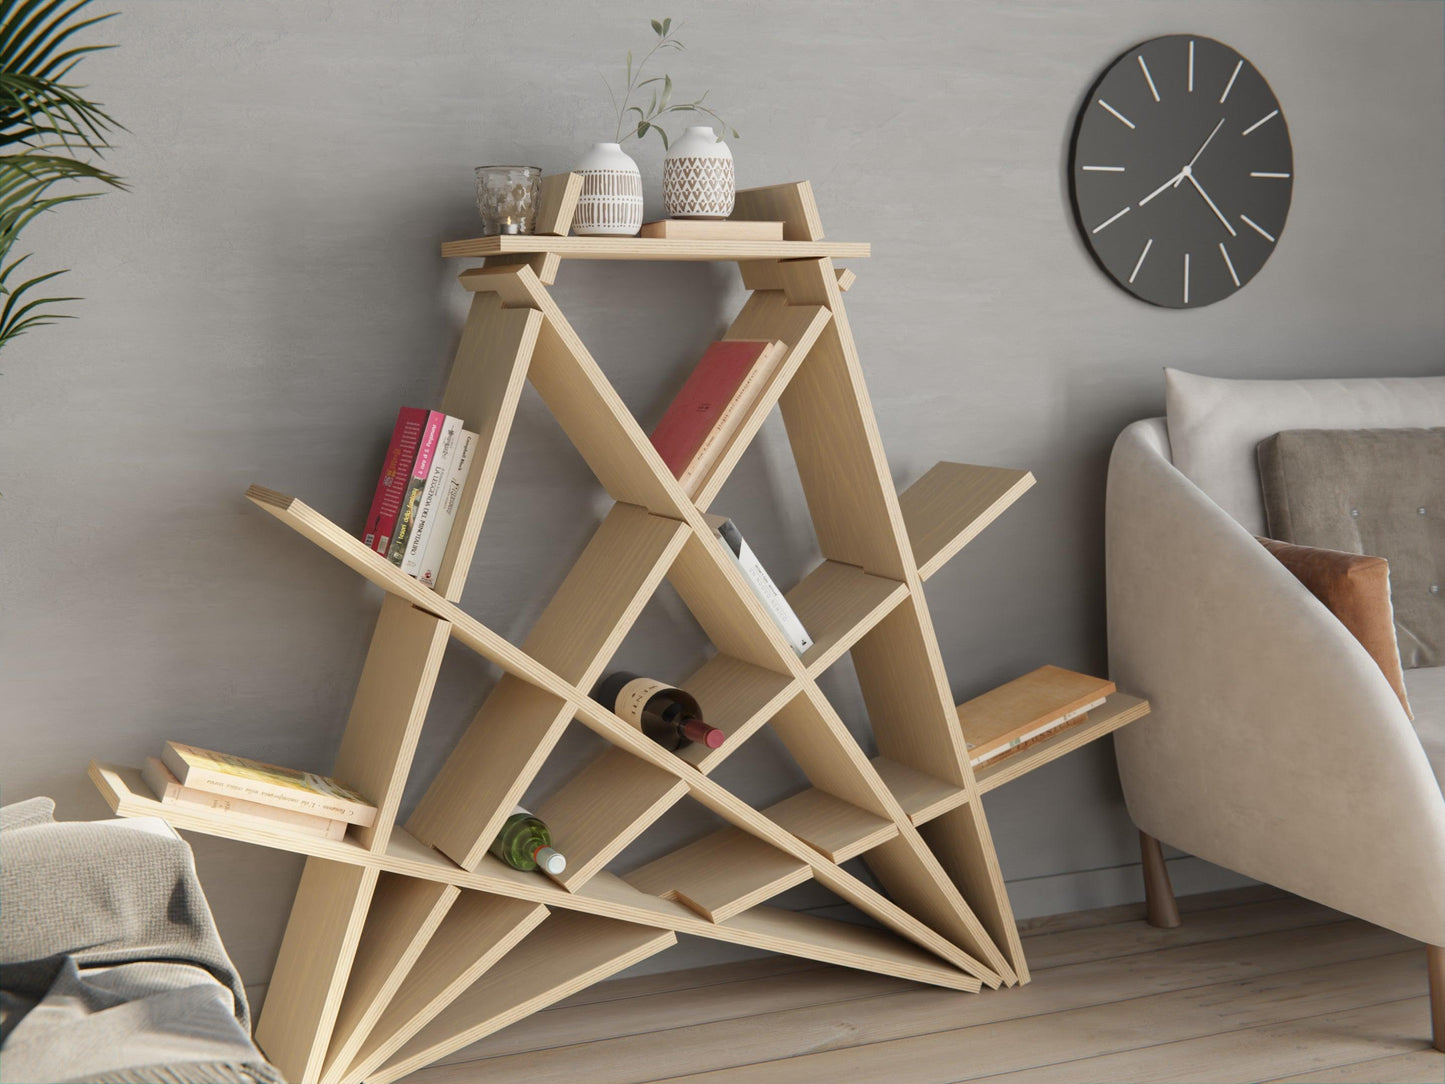 Transform your child's room with our ply bookshelf. The open design offers style and effortless book organisation.